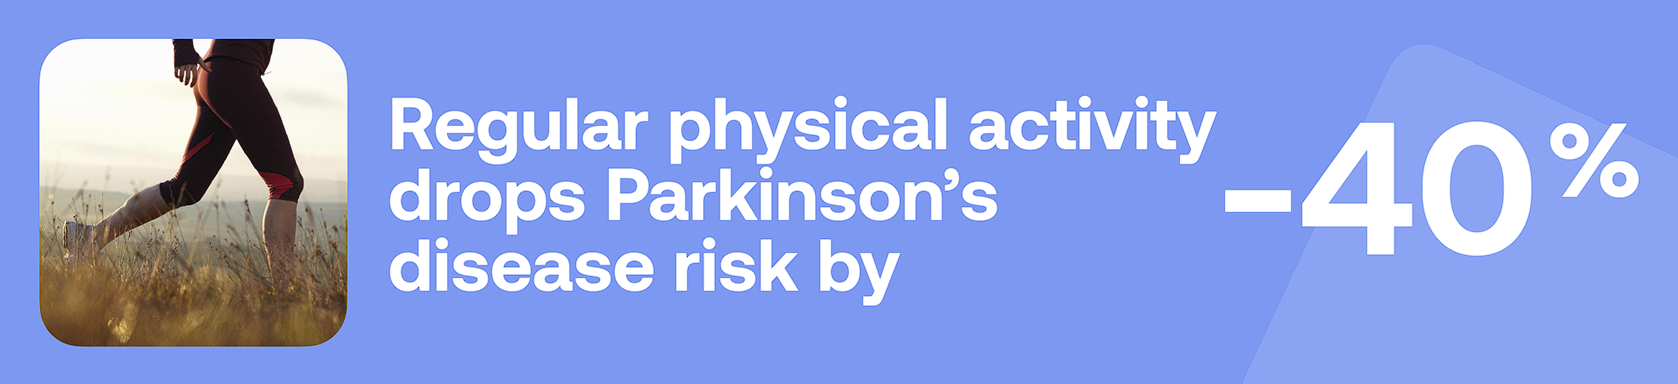 Regular physical activity drops Parkinson's disease risk by -40%